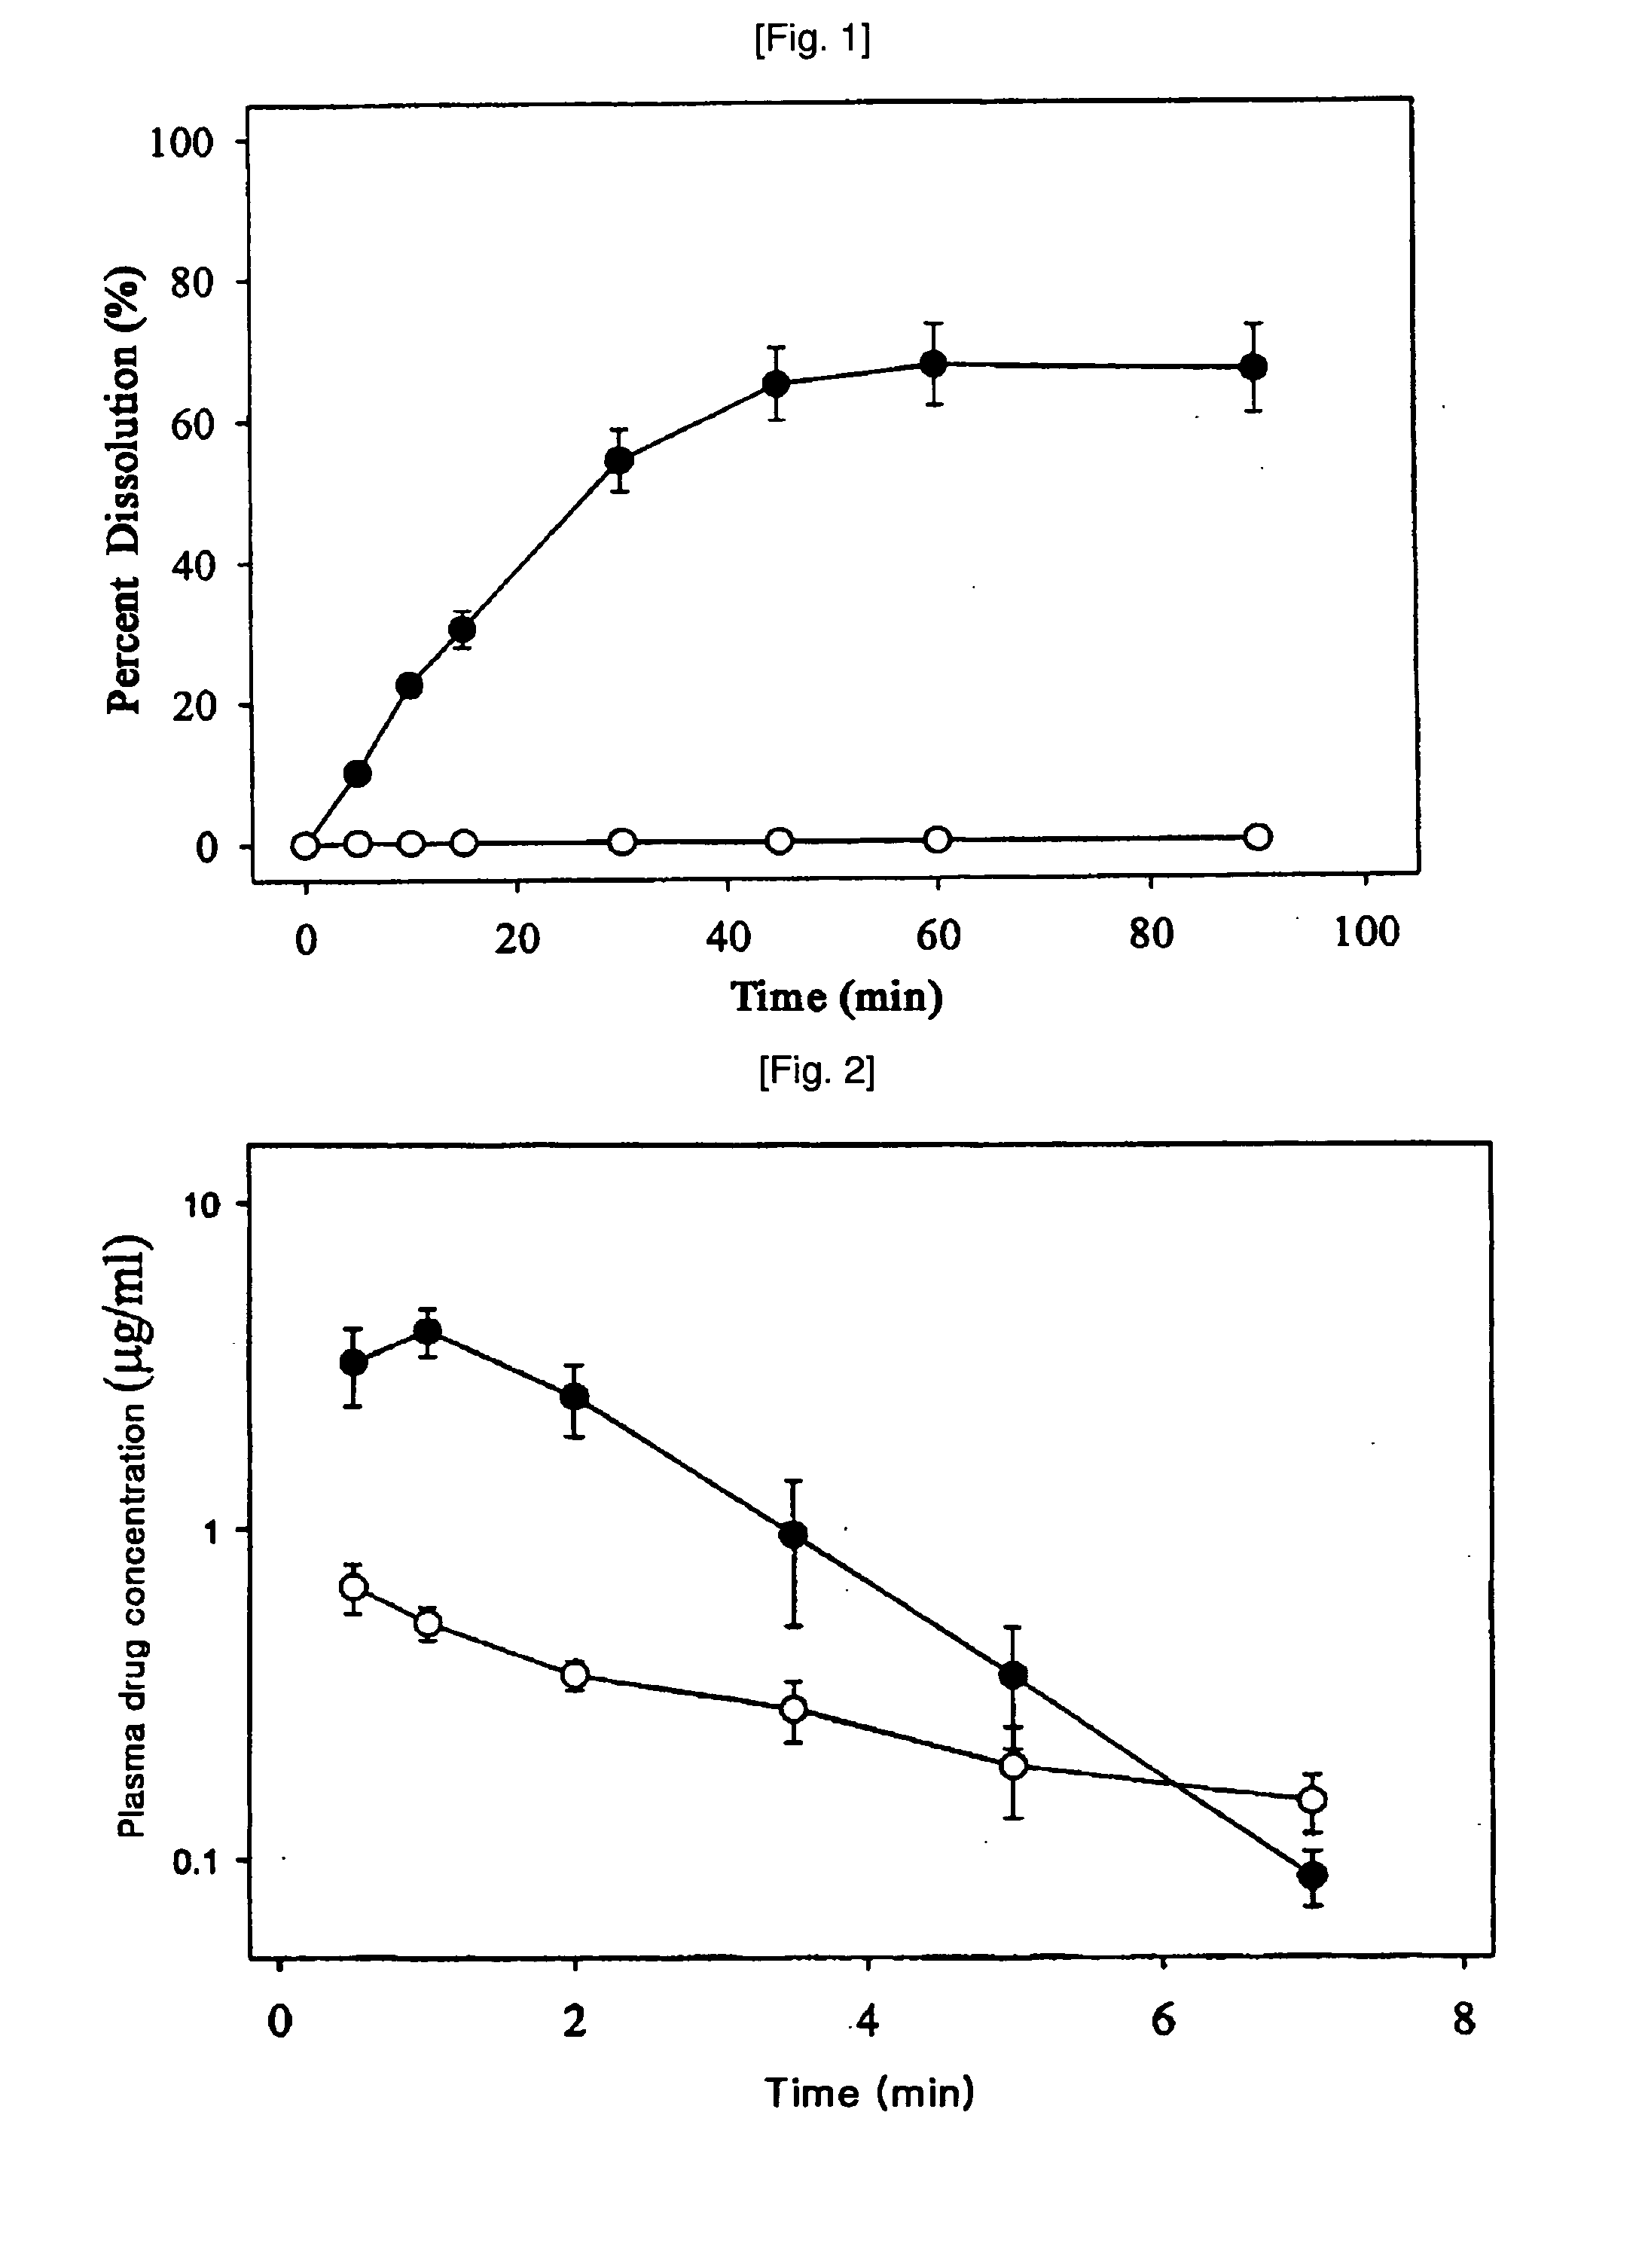 Thiourea Derivative-Containing Pharmaceutical Composition Having Improved Solubility and Bioavailability